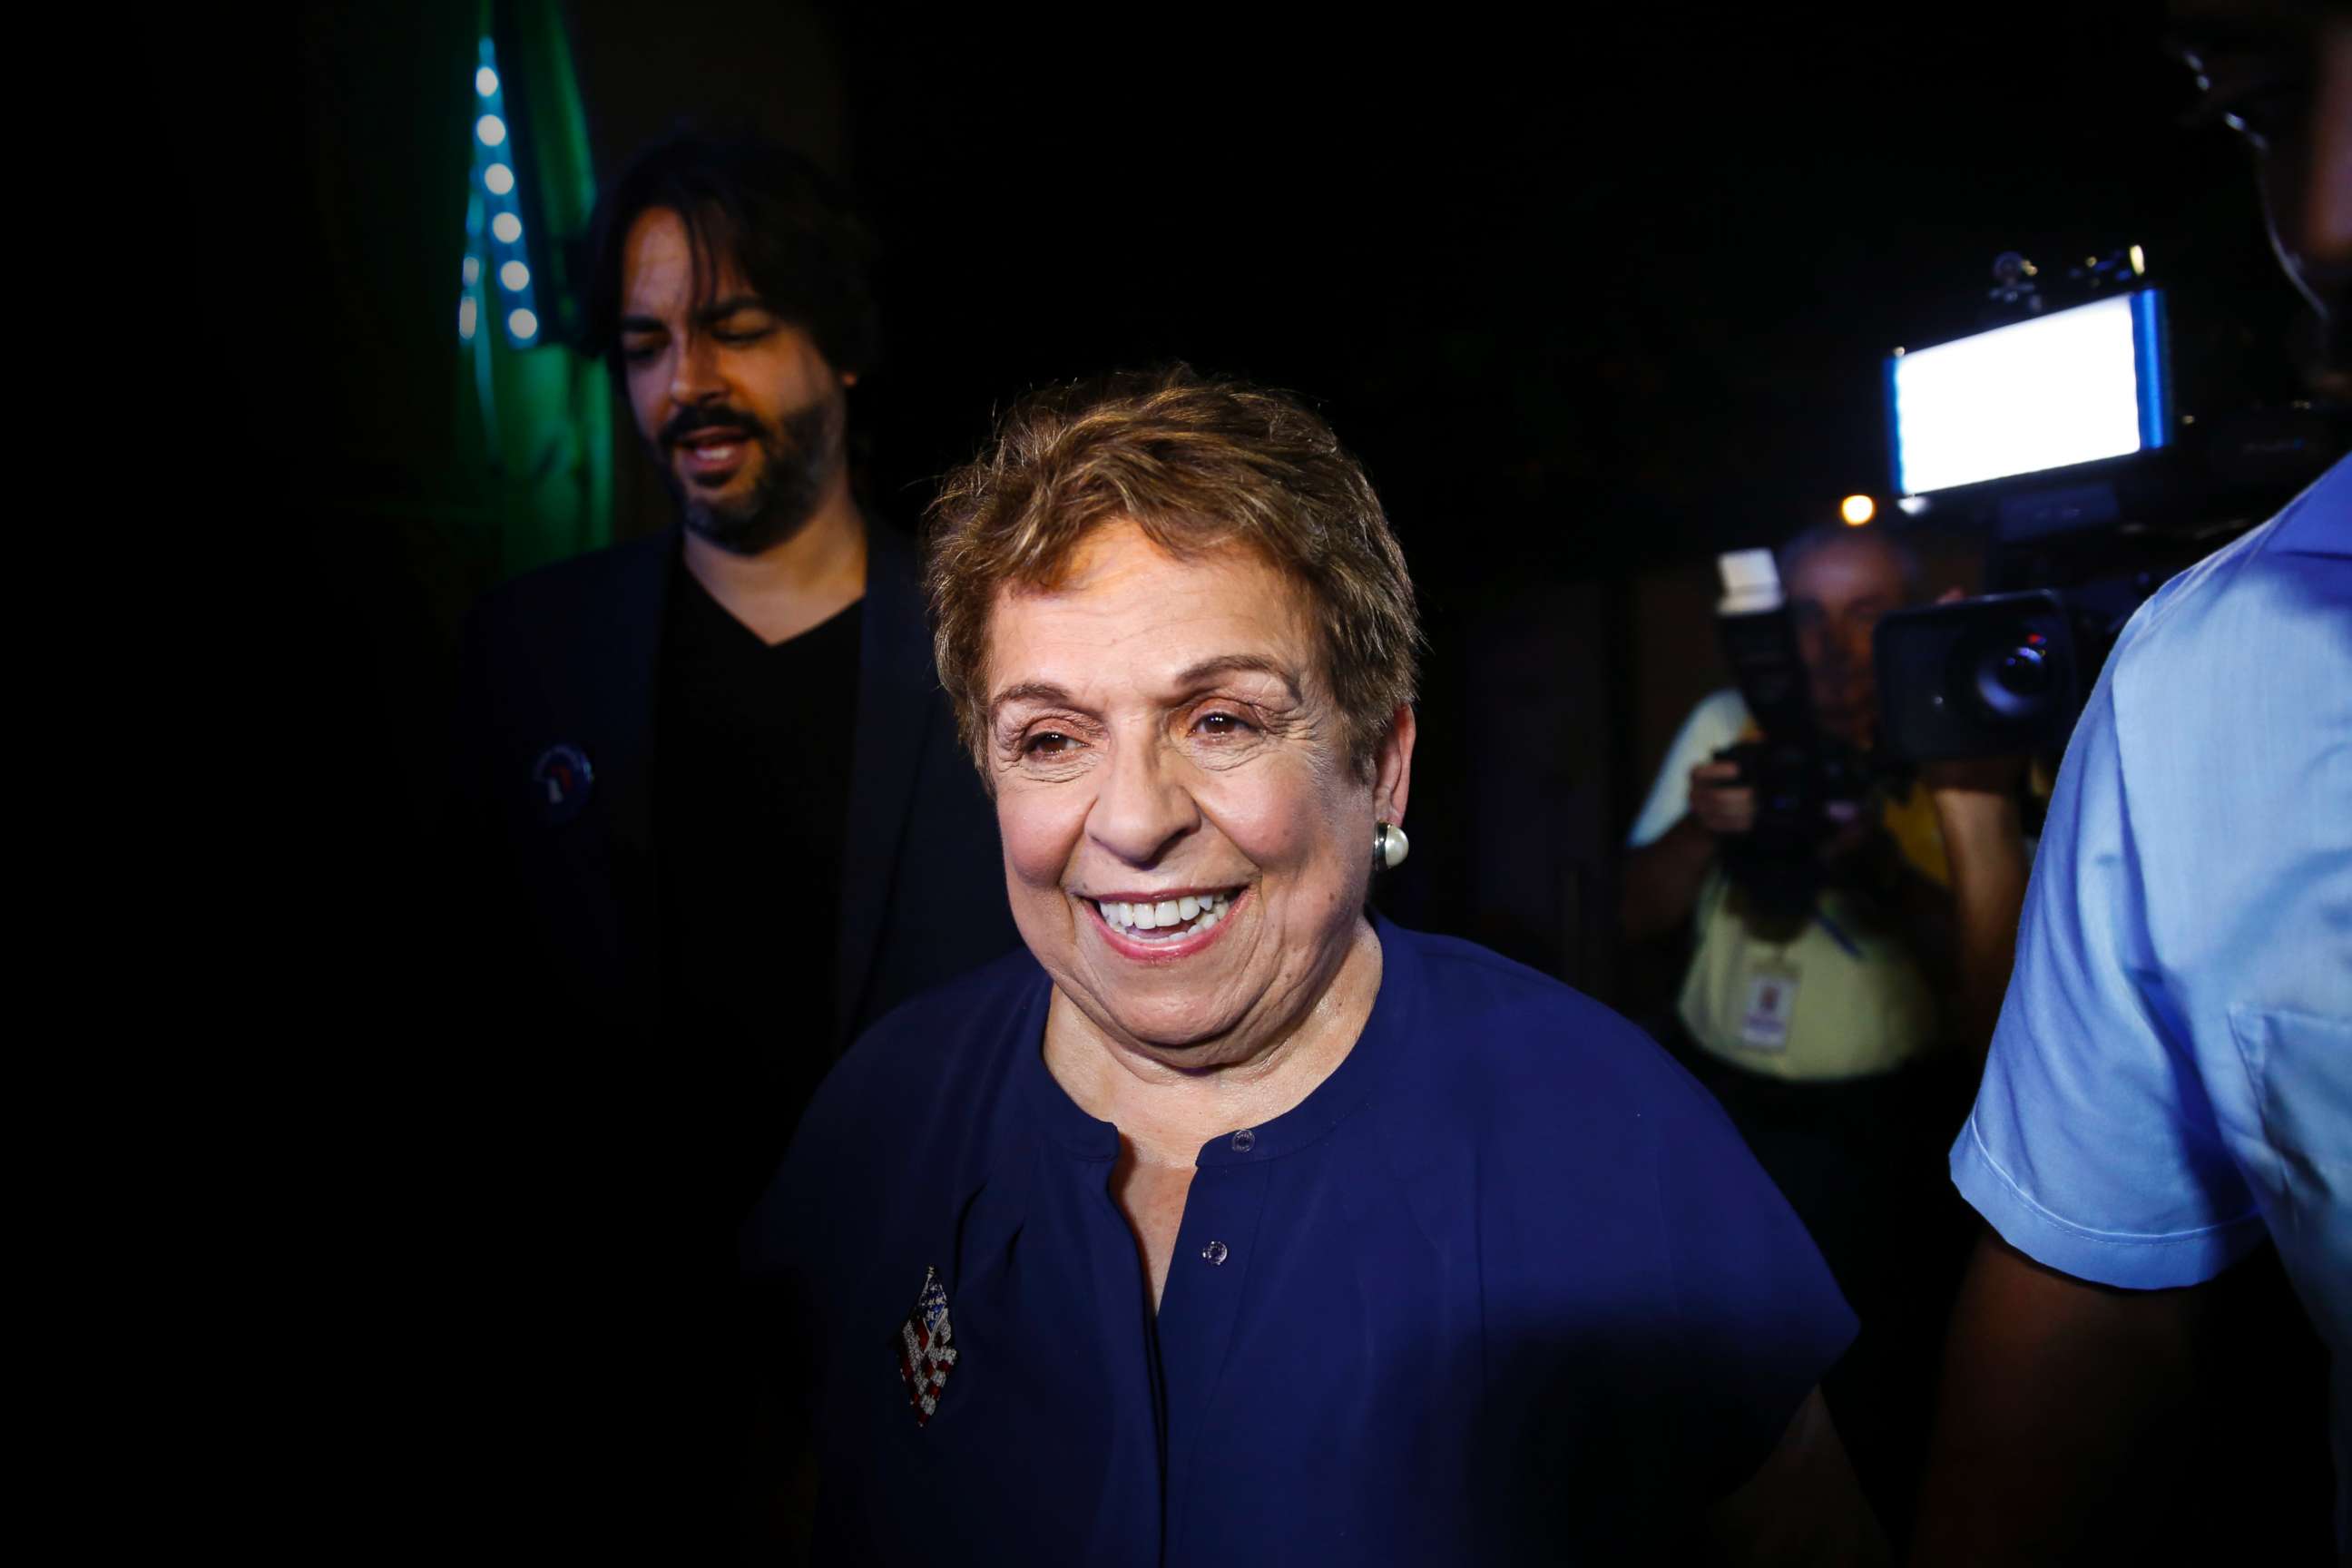 PHOTO: Democratic candidate for Congress Donna Shalala speaks with supporters during her watch party, Aug. 28, 2018, in the Little Havana neighborhood of Miami.